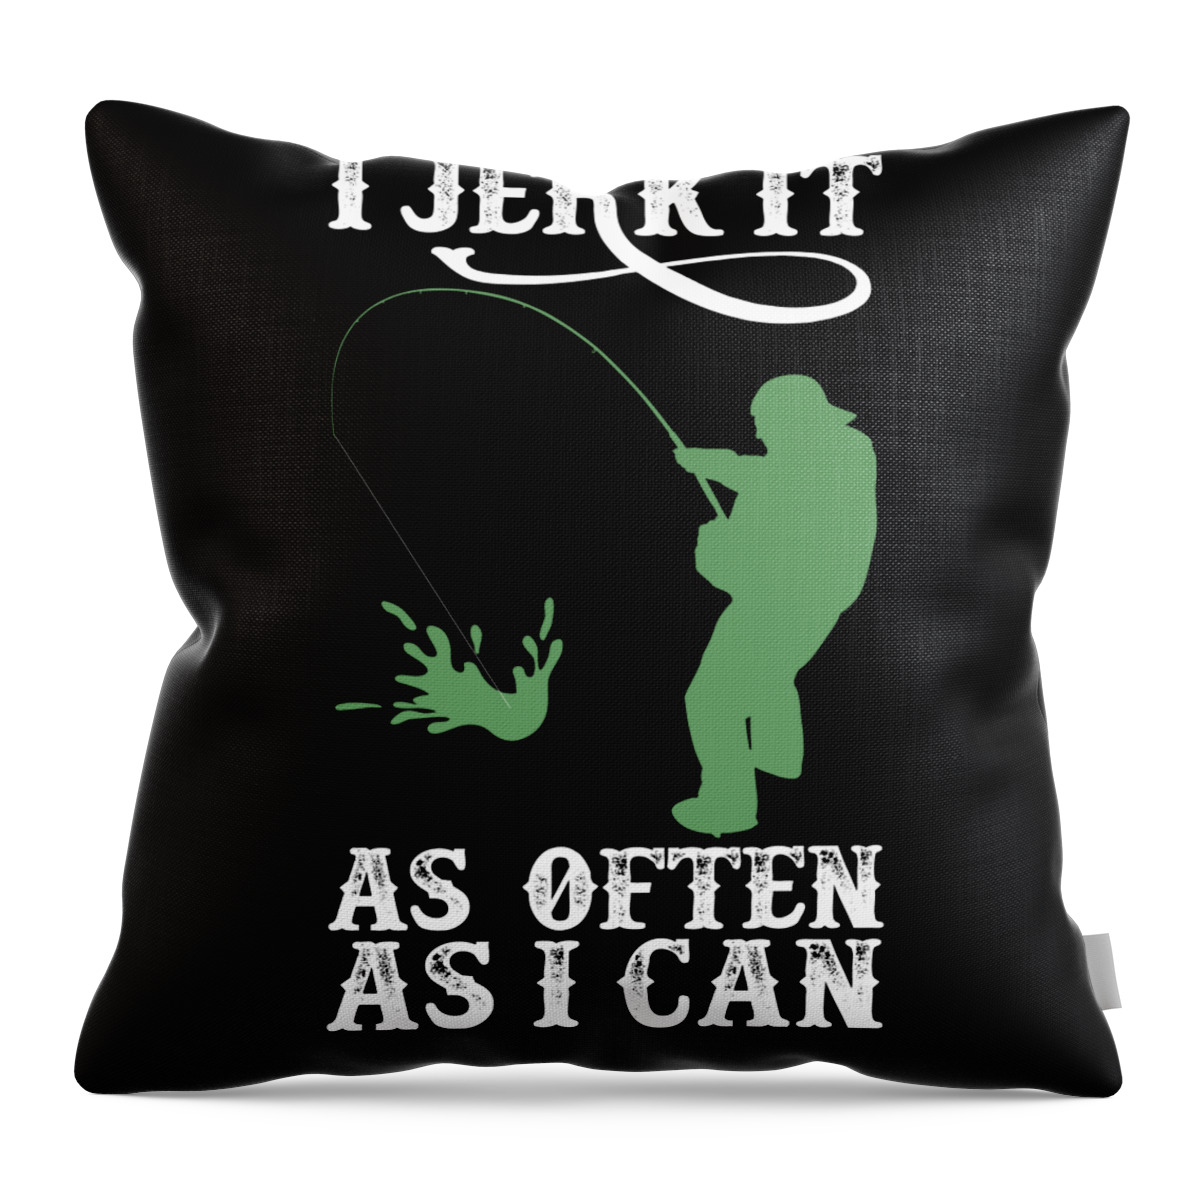 Fishing Puns Throw Pillow featuring the digital art Funny Fishing I Jerk It As Often As I Can by Jacob Zelazny